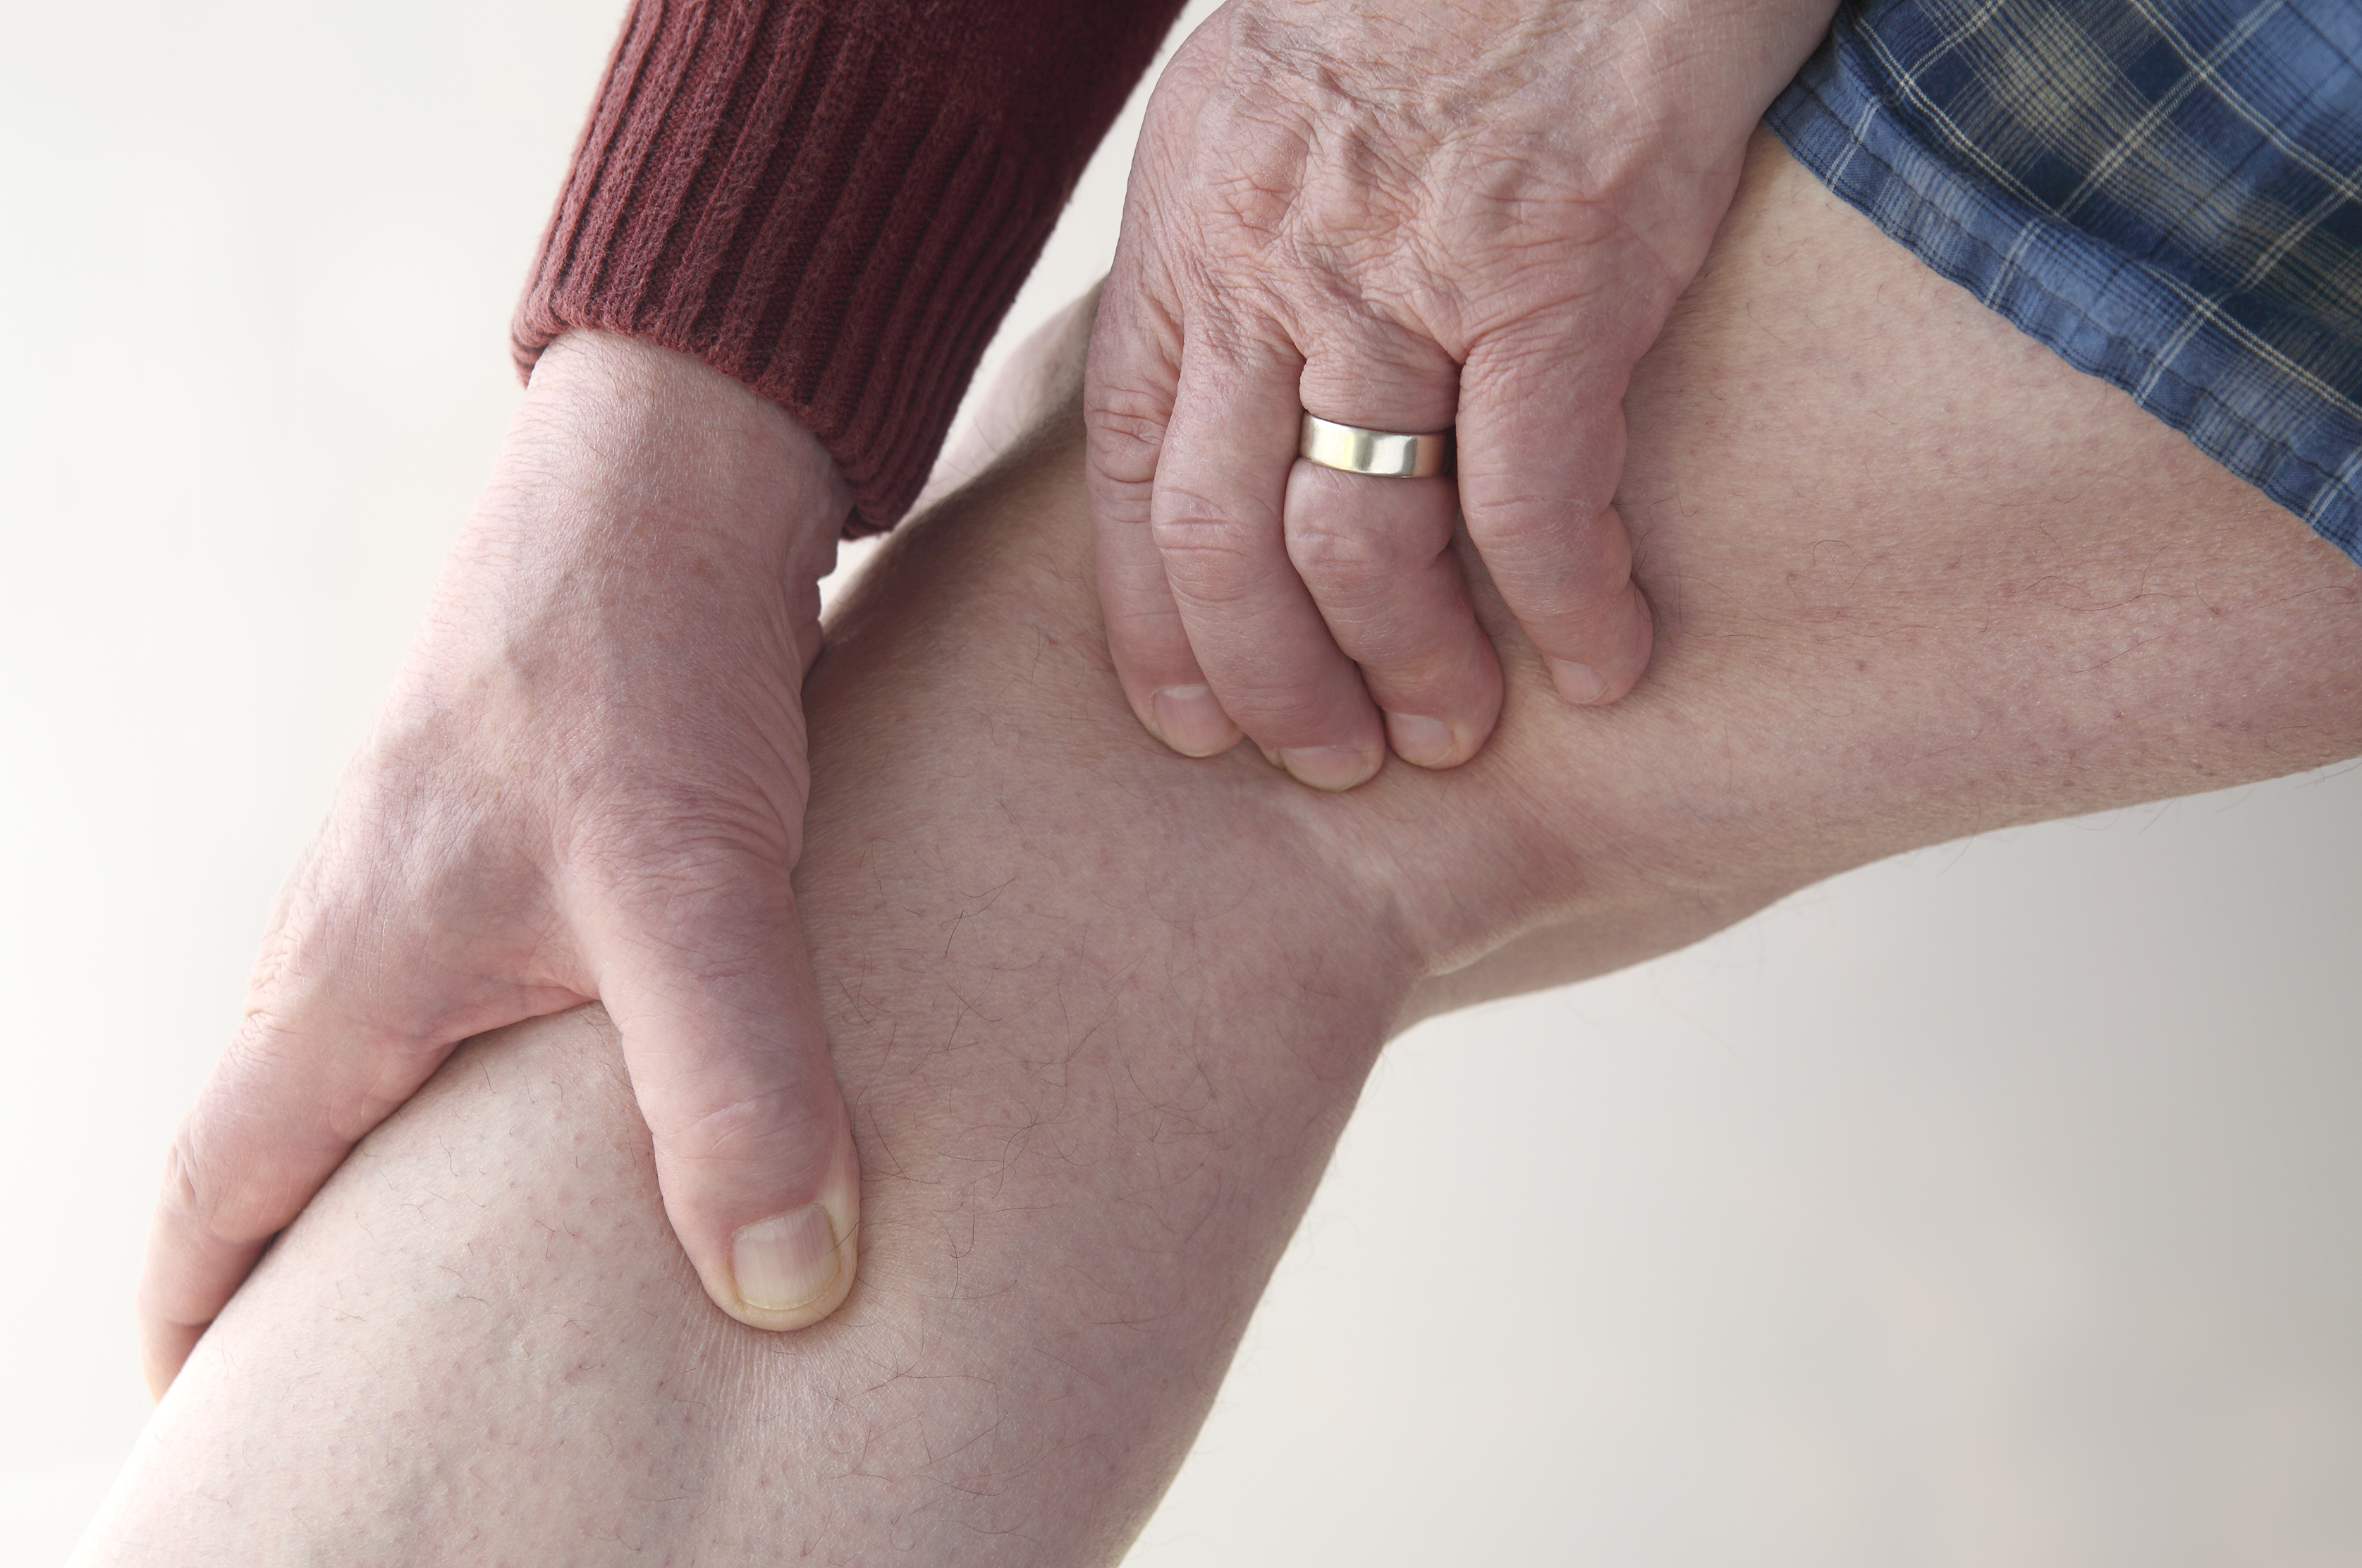 A Vein Clinic In Chicago Reveals Unexpected Symptoms of Vein Disease